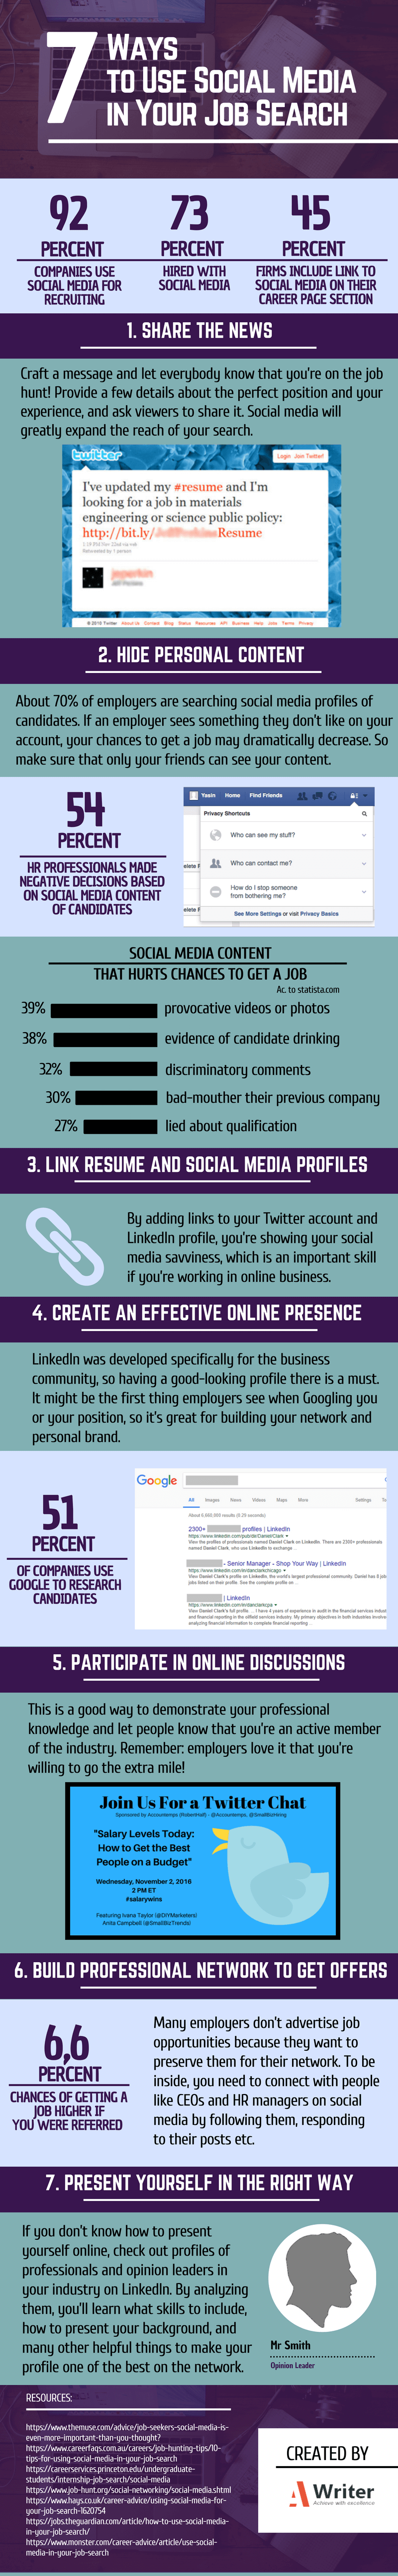 7 Ways to Use Social Media in Your Job Search by #NewToHR